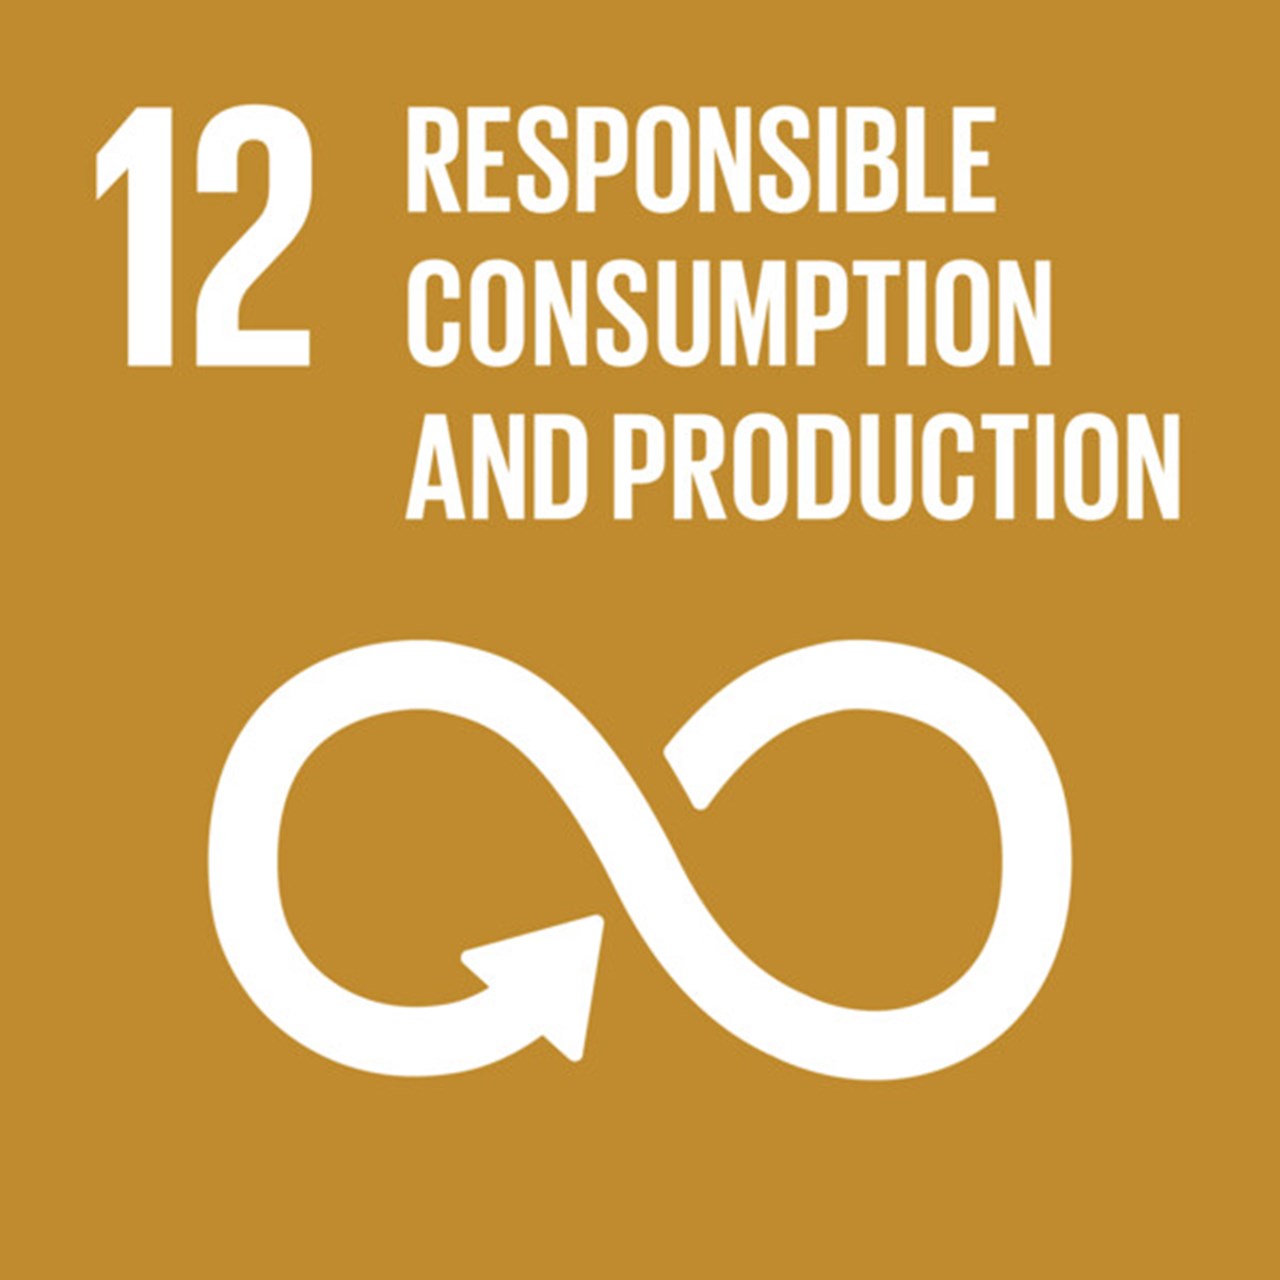 The Global Goals, Goal 12 - Responsible Consumption and Production